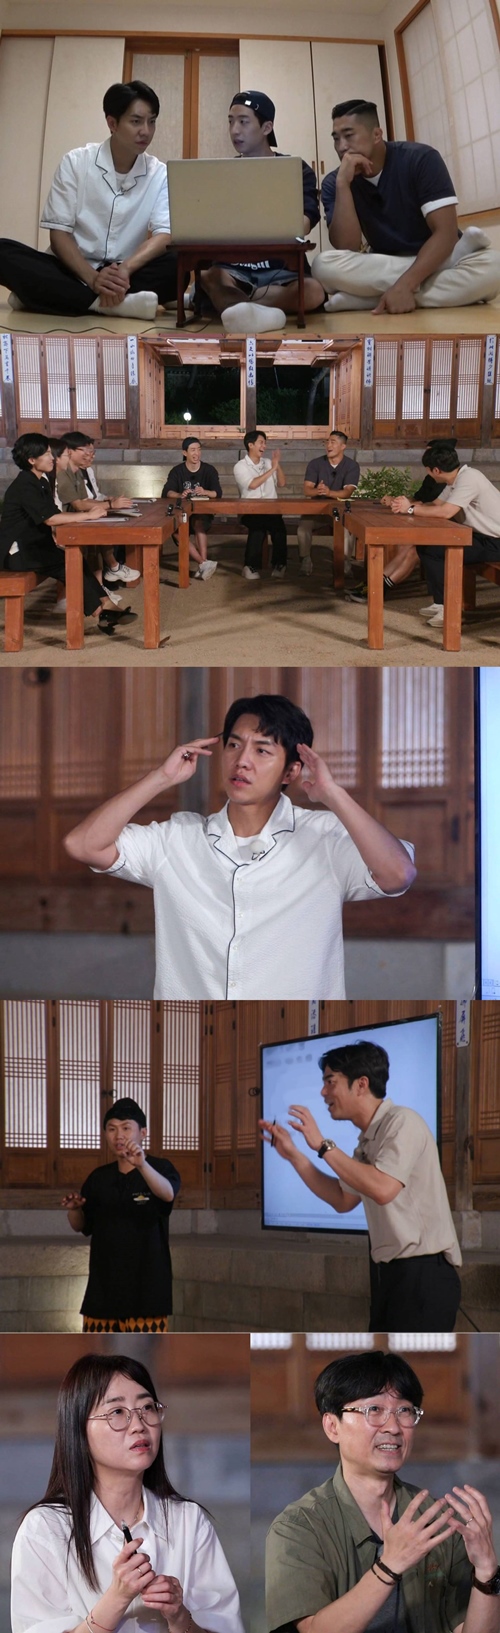 On SBS All The Butlers, which will be broadcast on the 12th, Genre Animals traditional Fairytale of members who became Kim Eun-hees Daily Writers Team will be released.Following last week, the show depicts members who became Kim Eun-hees Daily Writers Team adapting the traditional Fairytale as Genre Animals.The members are said to have shown a passionate appearance to meet and cover the actual Kim Eun-hees assistants.The passions of each teams Synopsys conferences were constant, and both teams were enthusiastic about the idea of ​​falling waterfalls and devoted themselves to the creation of Synopsys.In particular, Jeon Seok-ho, a daily student, immersed in the role of Synopsys, exploding explosive acting skills and making the scene furious.Indeed, the two teams Genre Animals traditional Fairytale raises expectations about what story and reversal they will have.Later, Synopsys presentation time, Kim Eun-hees assistant, Sam In-bang, became a judge to fairly evaluate the Synopsys of the members.Ha Hong-il, the prosecutor Seo In-sun, and Jang Hang-jun continued their detailed examination by utilizing their own expertise.In particular, director Jang Hang-jun and Kim Eun-hee presented the direction of the members Synopsys and gave an idea.The two of them are the back door of the writers couple and have been active as masters. They also said that they have even sounded the hearts of the members who announced Synopsys.The honor of winning the first prize, Kim Eun-hees notebook, will go to which team, and the traditional Fairytale, adapted by members who have transformed into daily writers as Genre Animals, can be seen at All The Butlers, which airs at 6:30 pm on the same day.All The Butlers